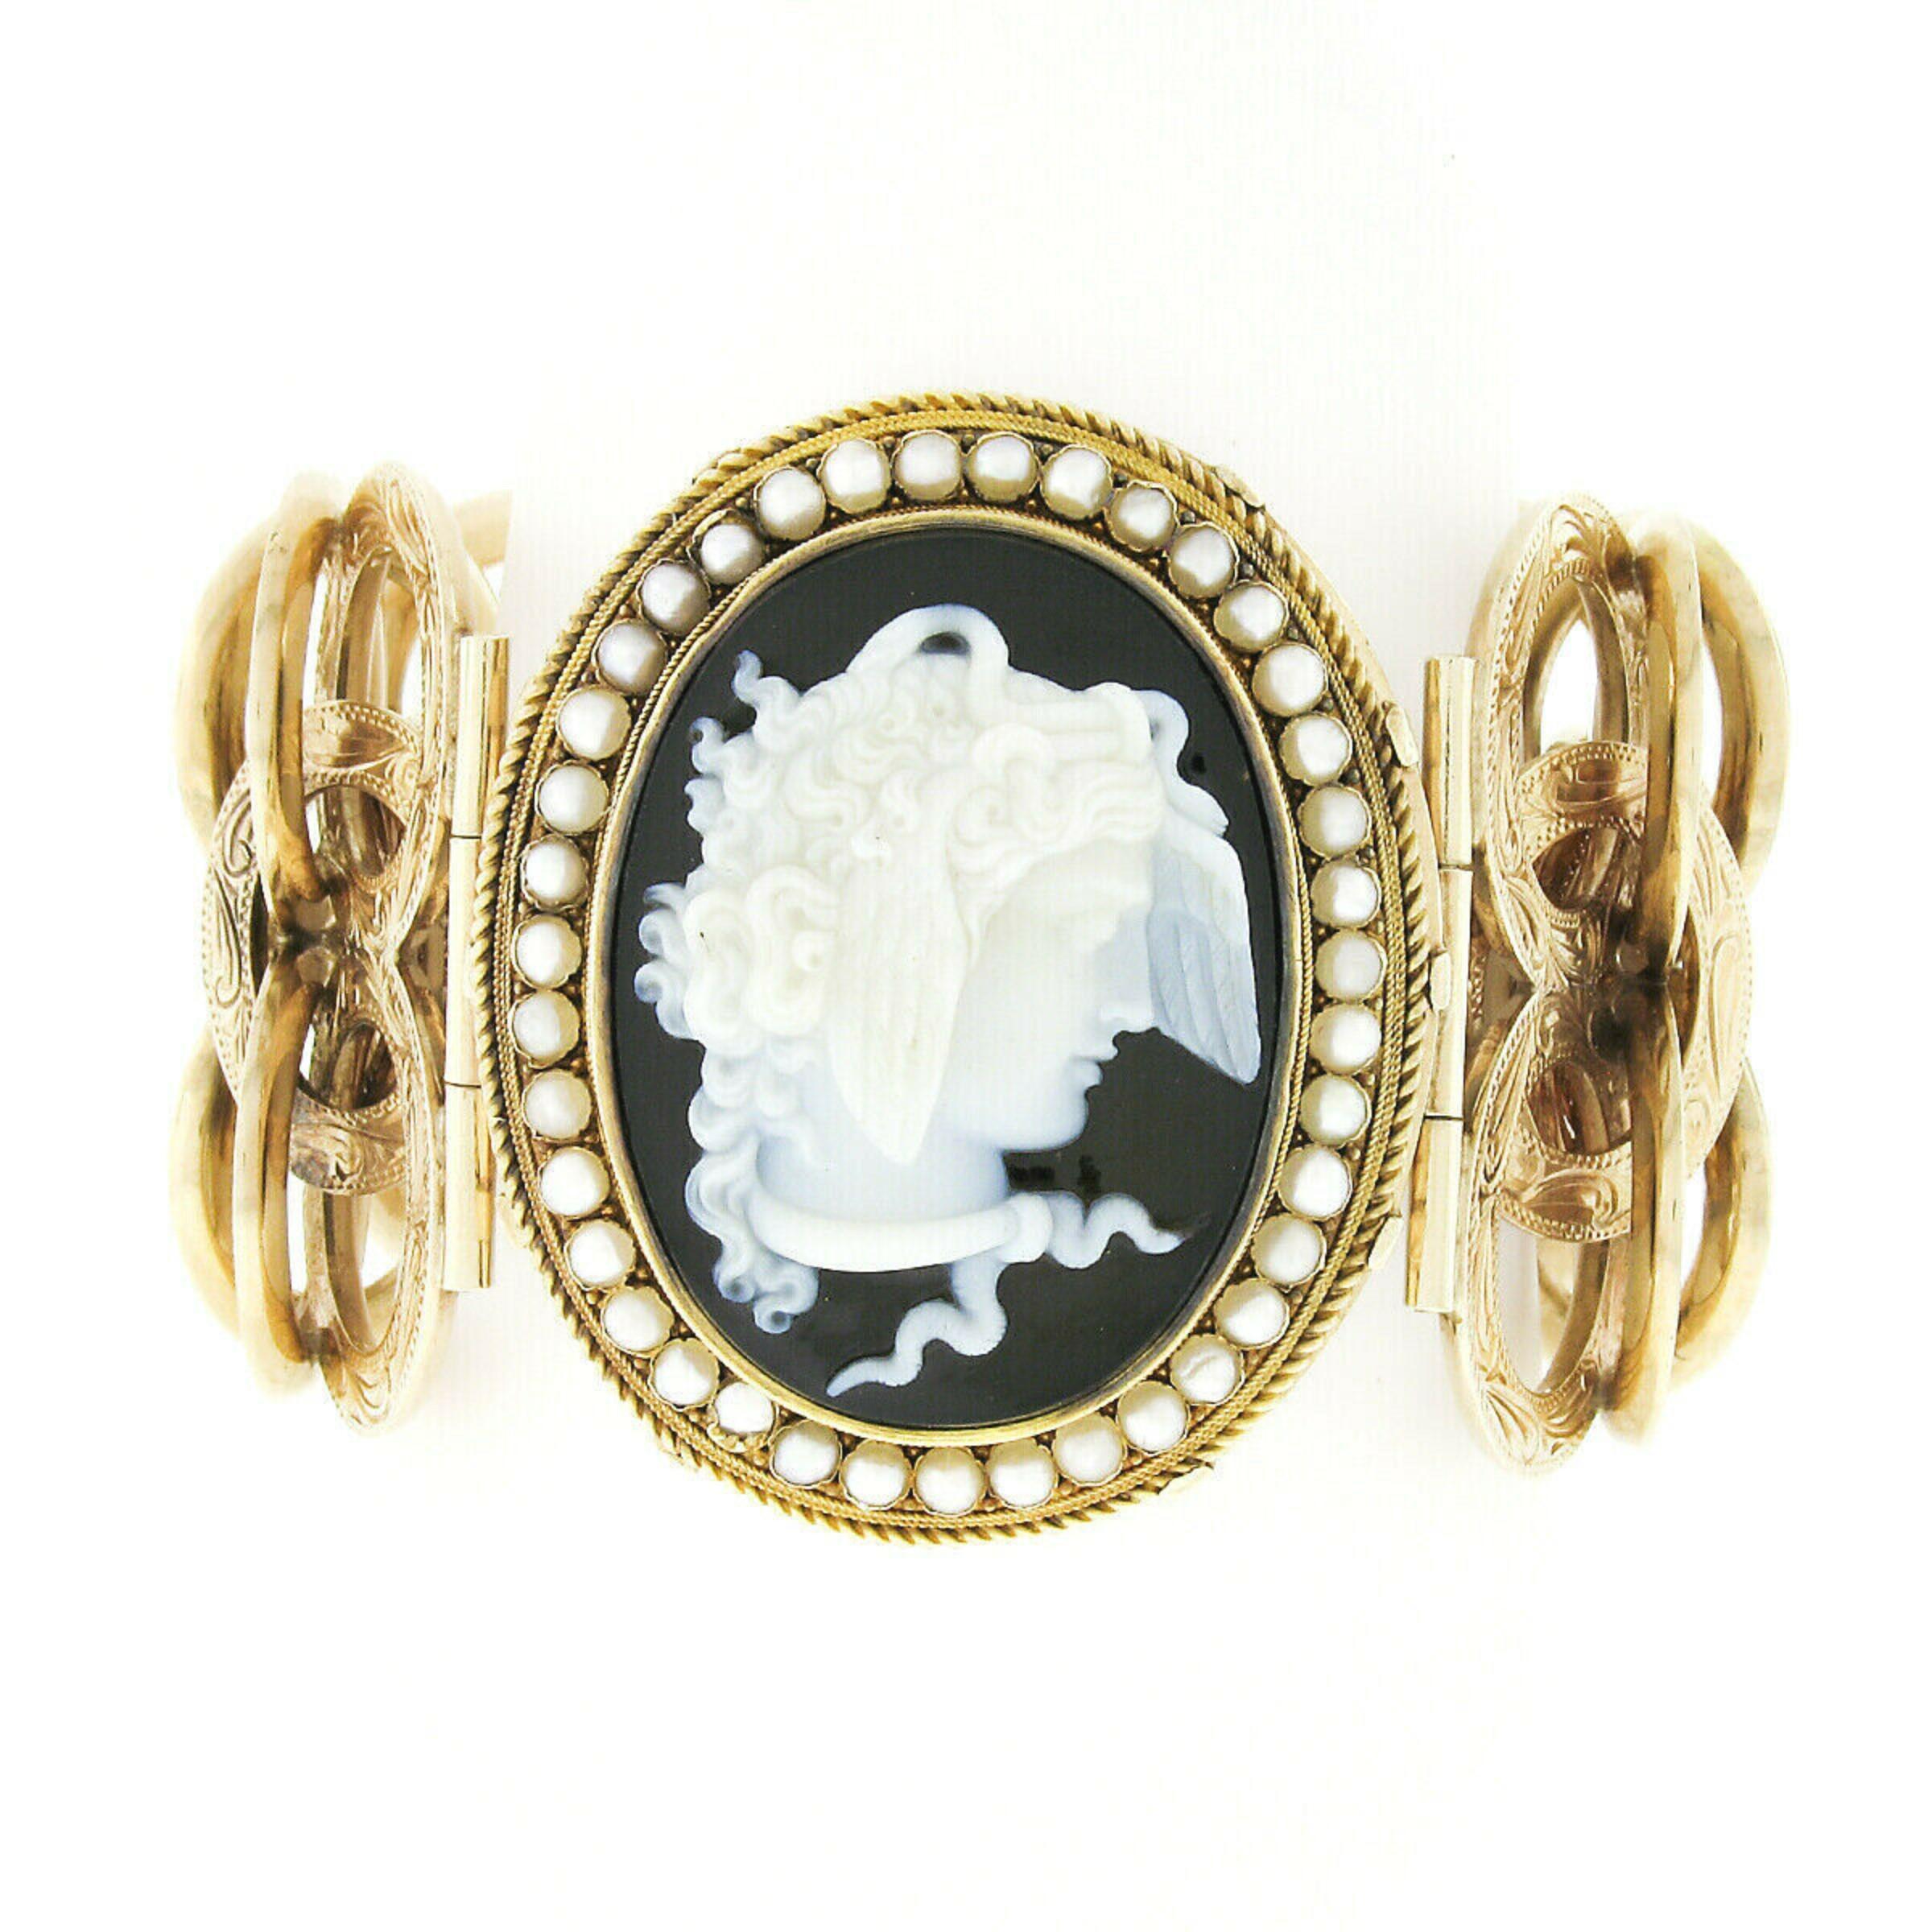 This incredibly designed antique statement piece was crafted in solid 14k gold during the Victorian era. The bracelet features a large center section that carries an amazing and well carved black onyx cameo showing a portrait with fascinating